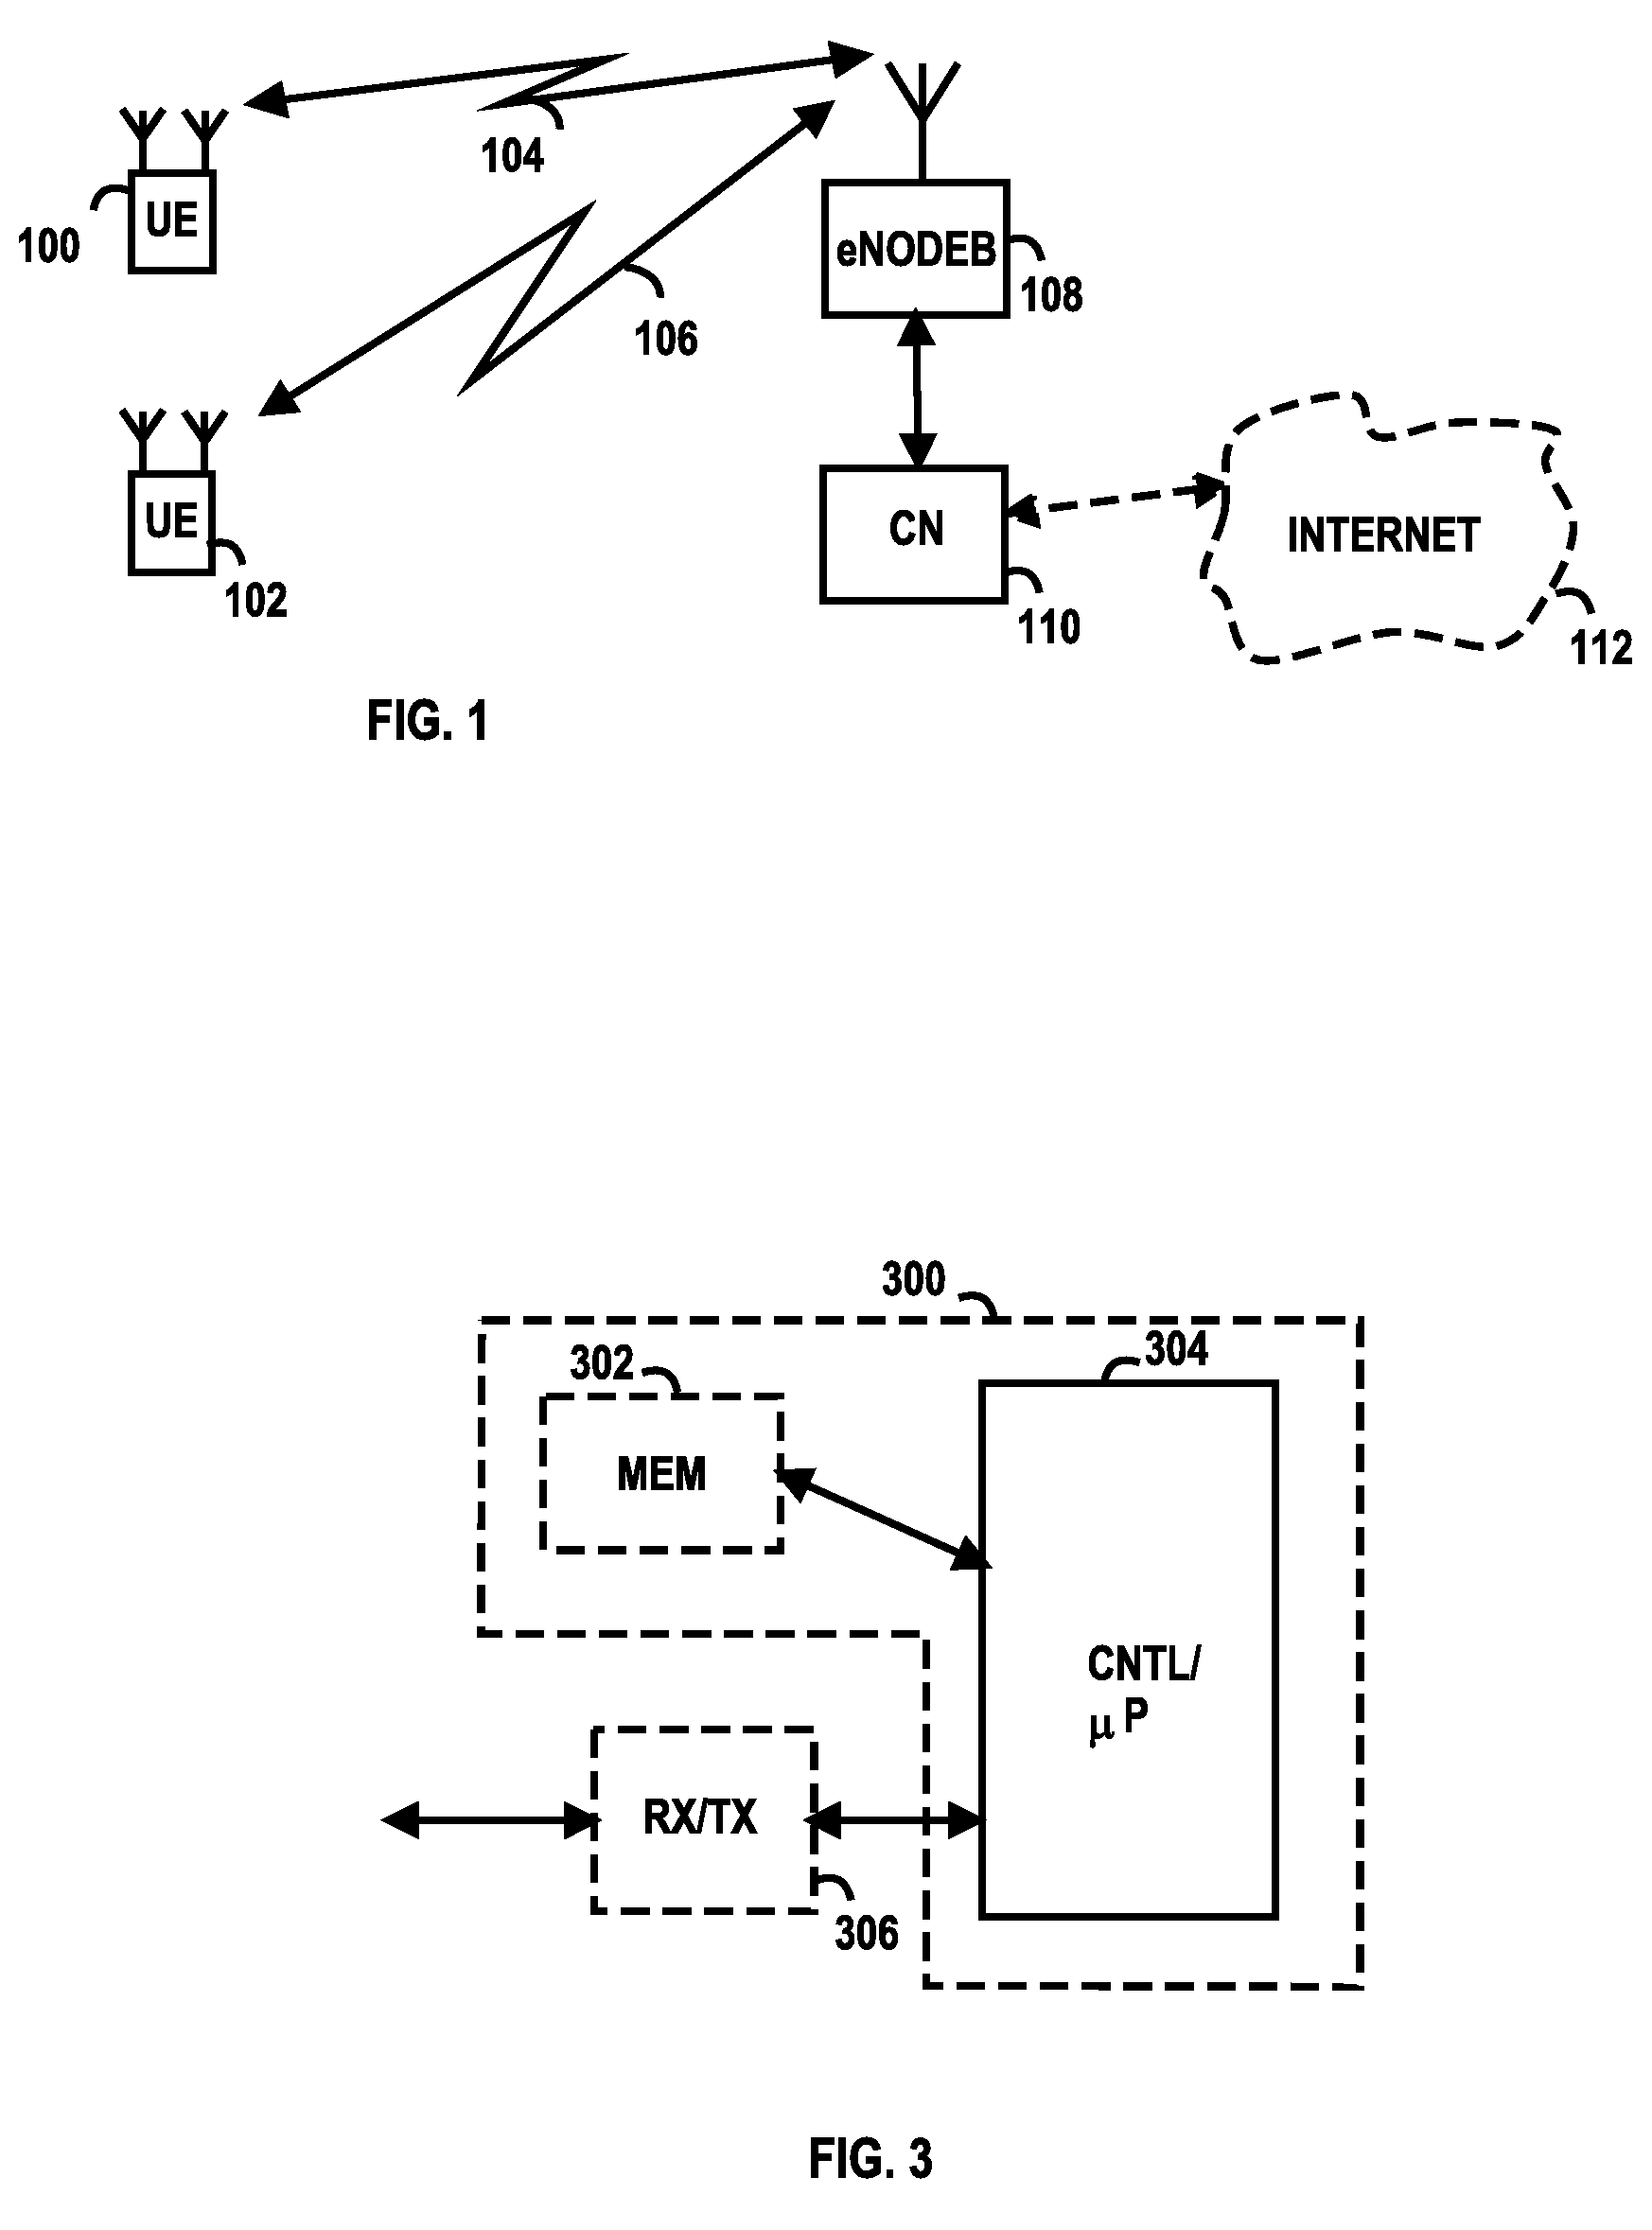 Method and Apparatus for Adjusting Transmission Power in a Radio System